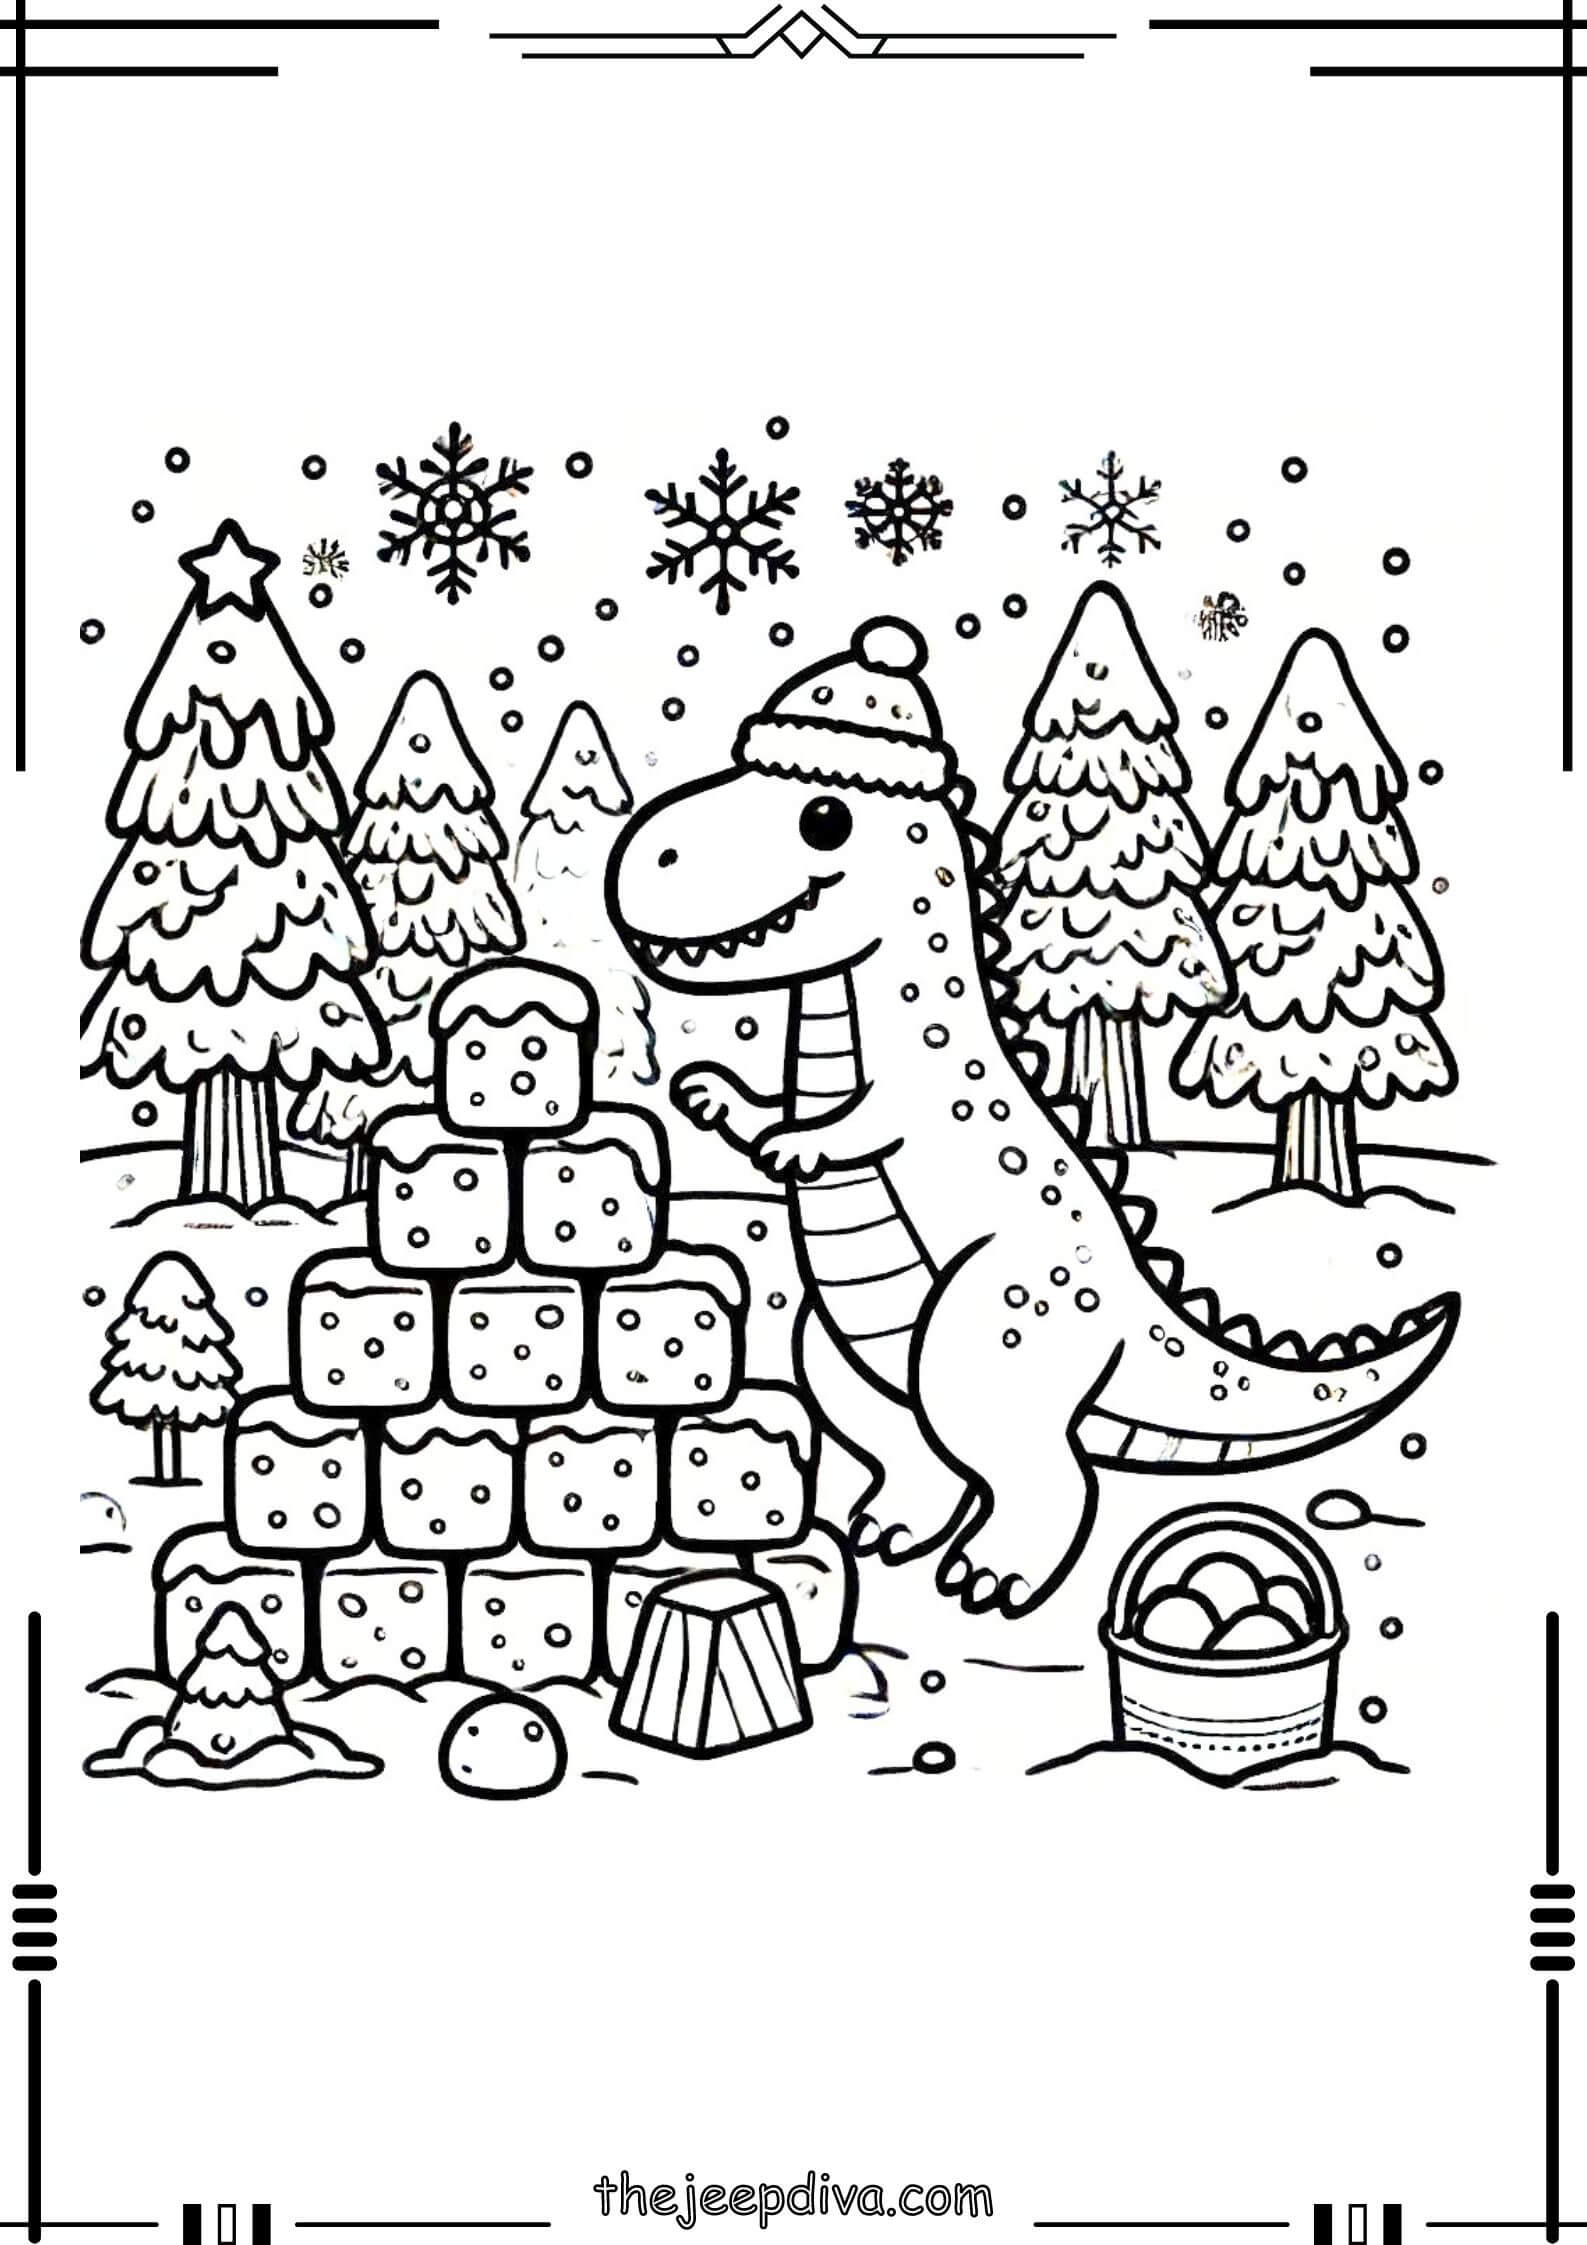 Dinosaur-Colouring-Pages-Hard-12